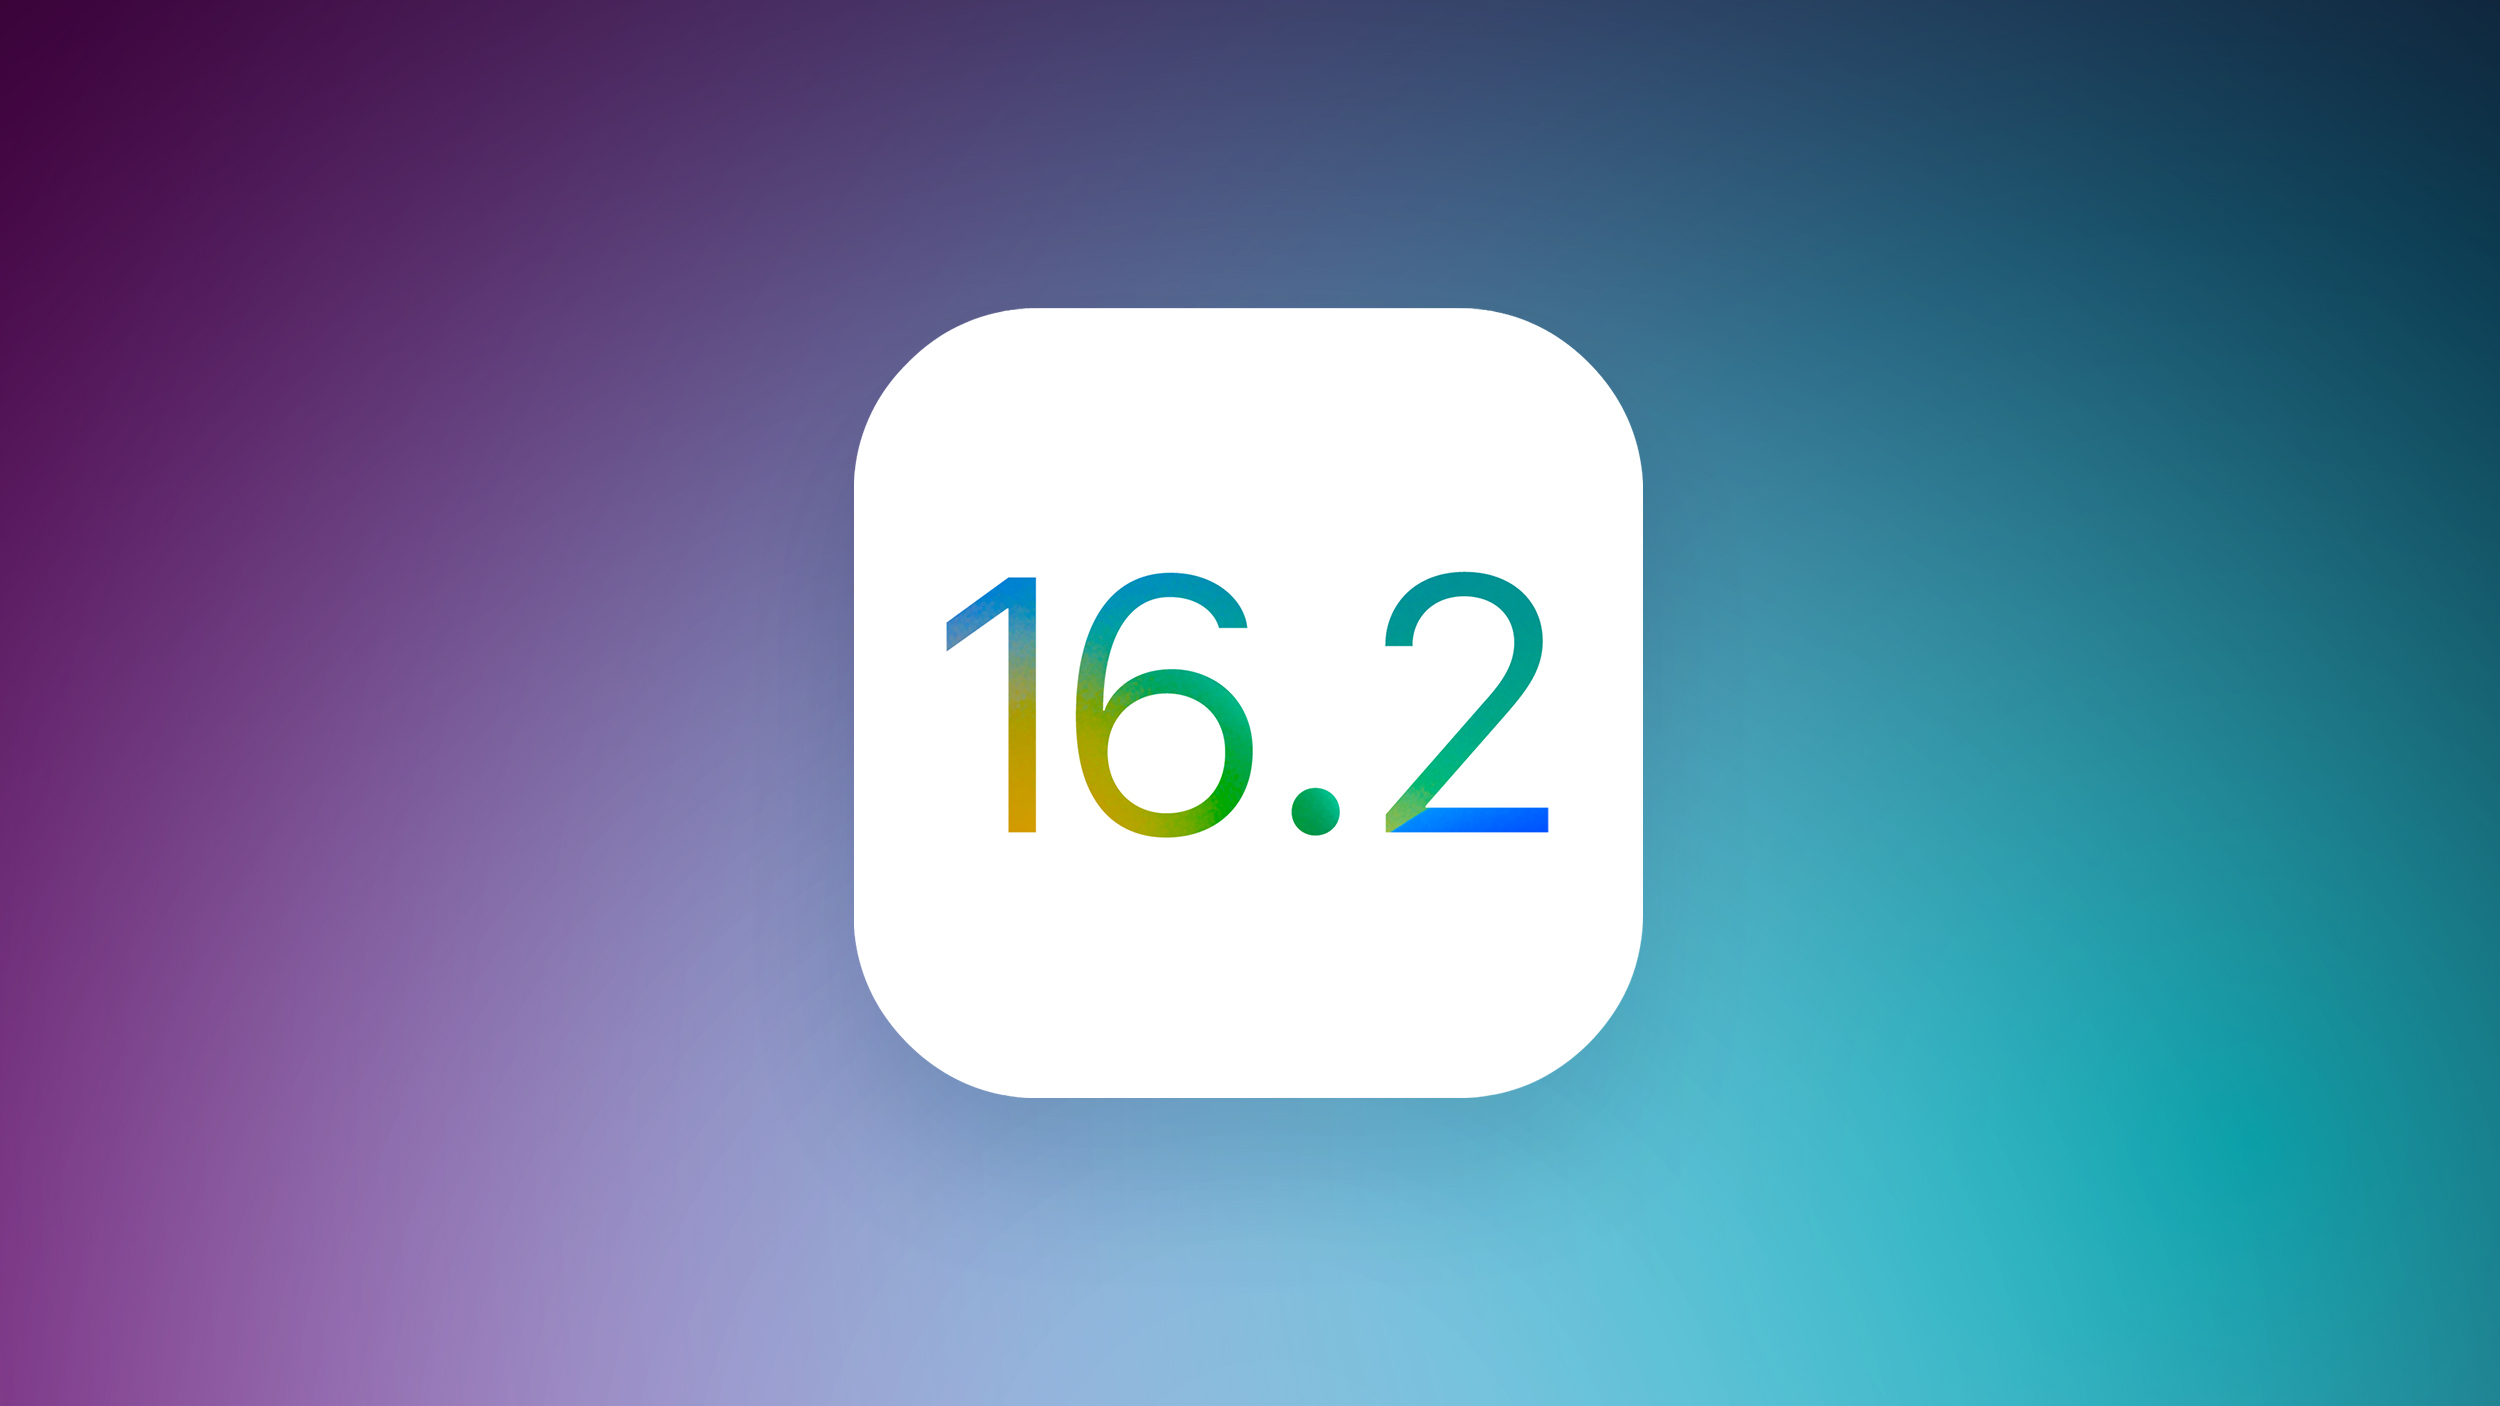 photo of When Will iOS 16.2 Be Released? image